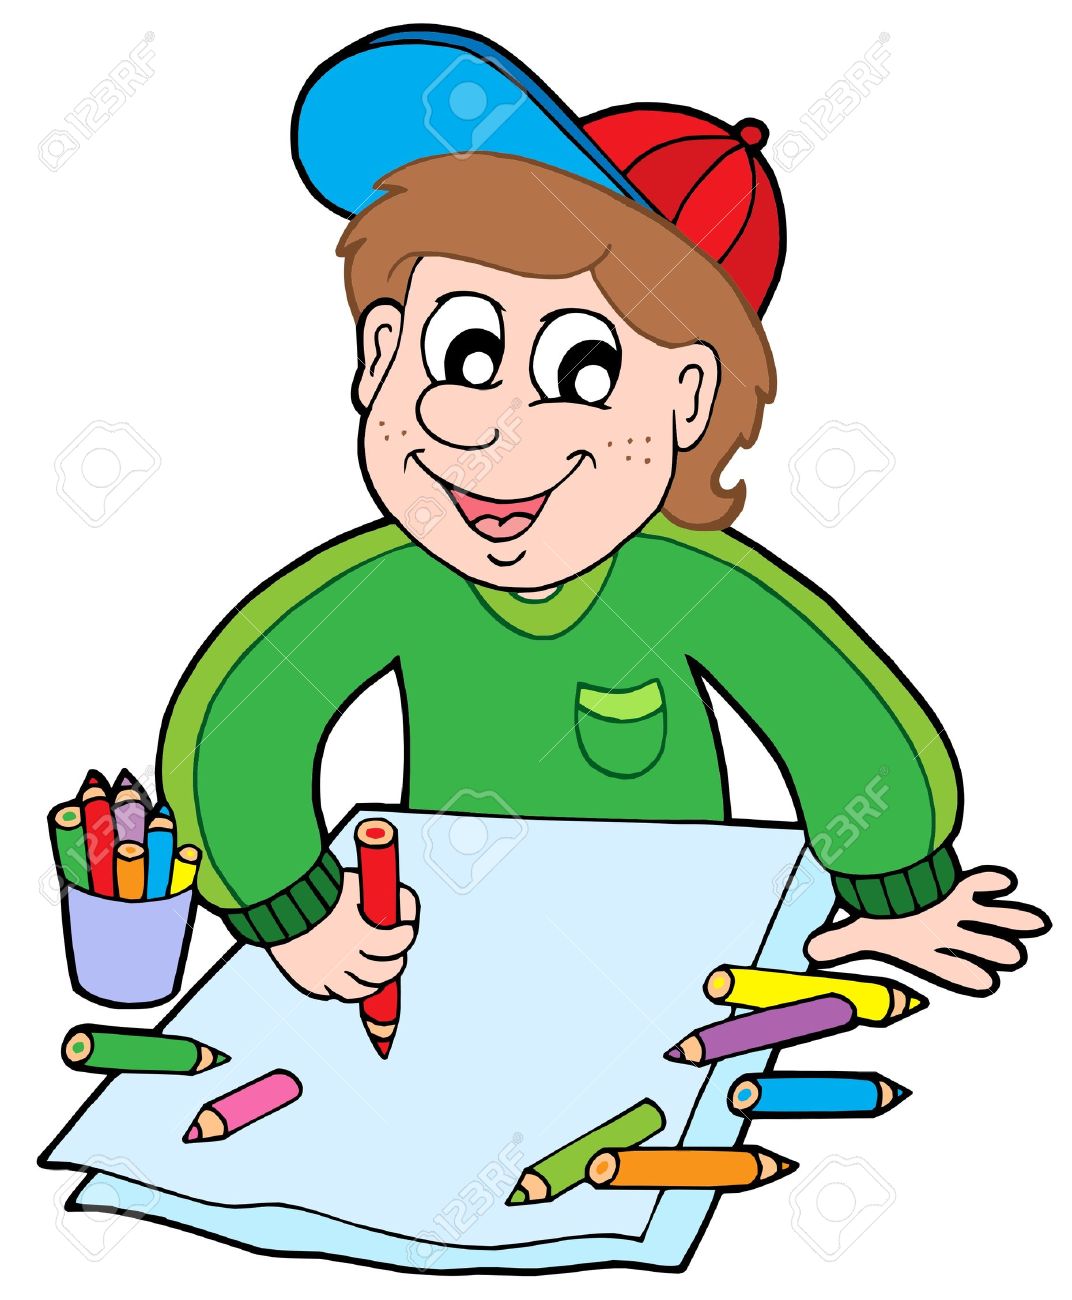 crayons clipart person